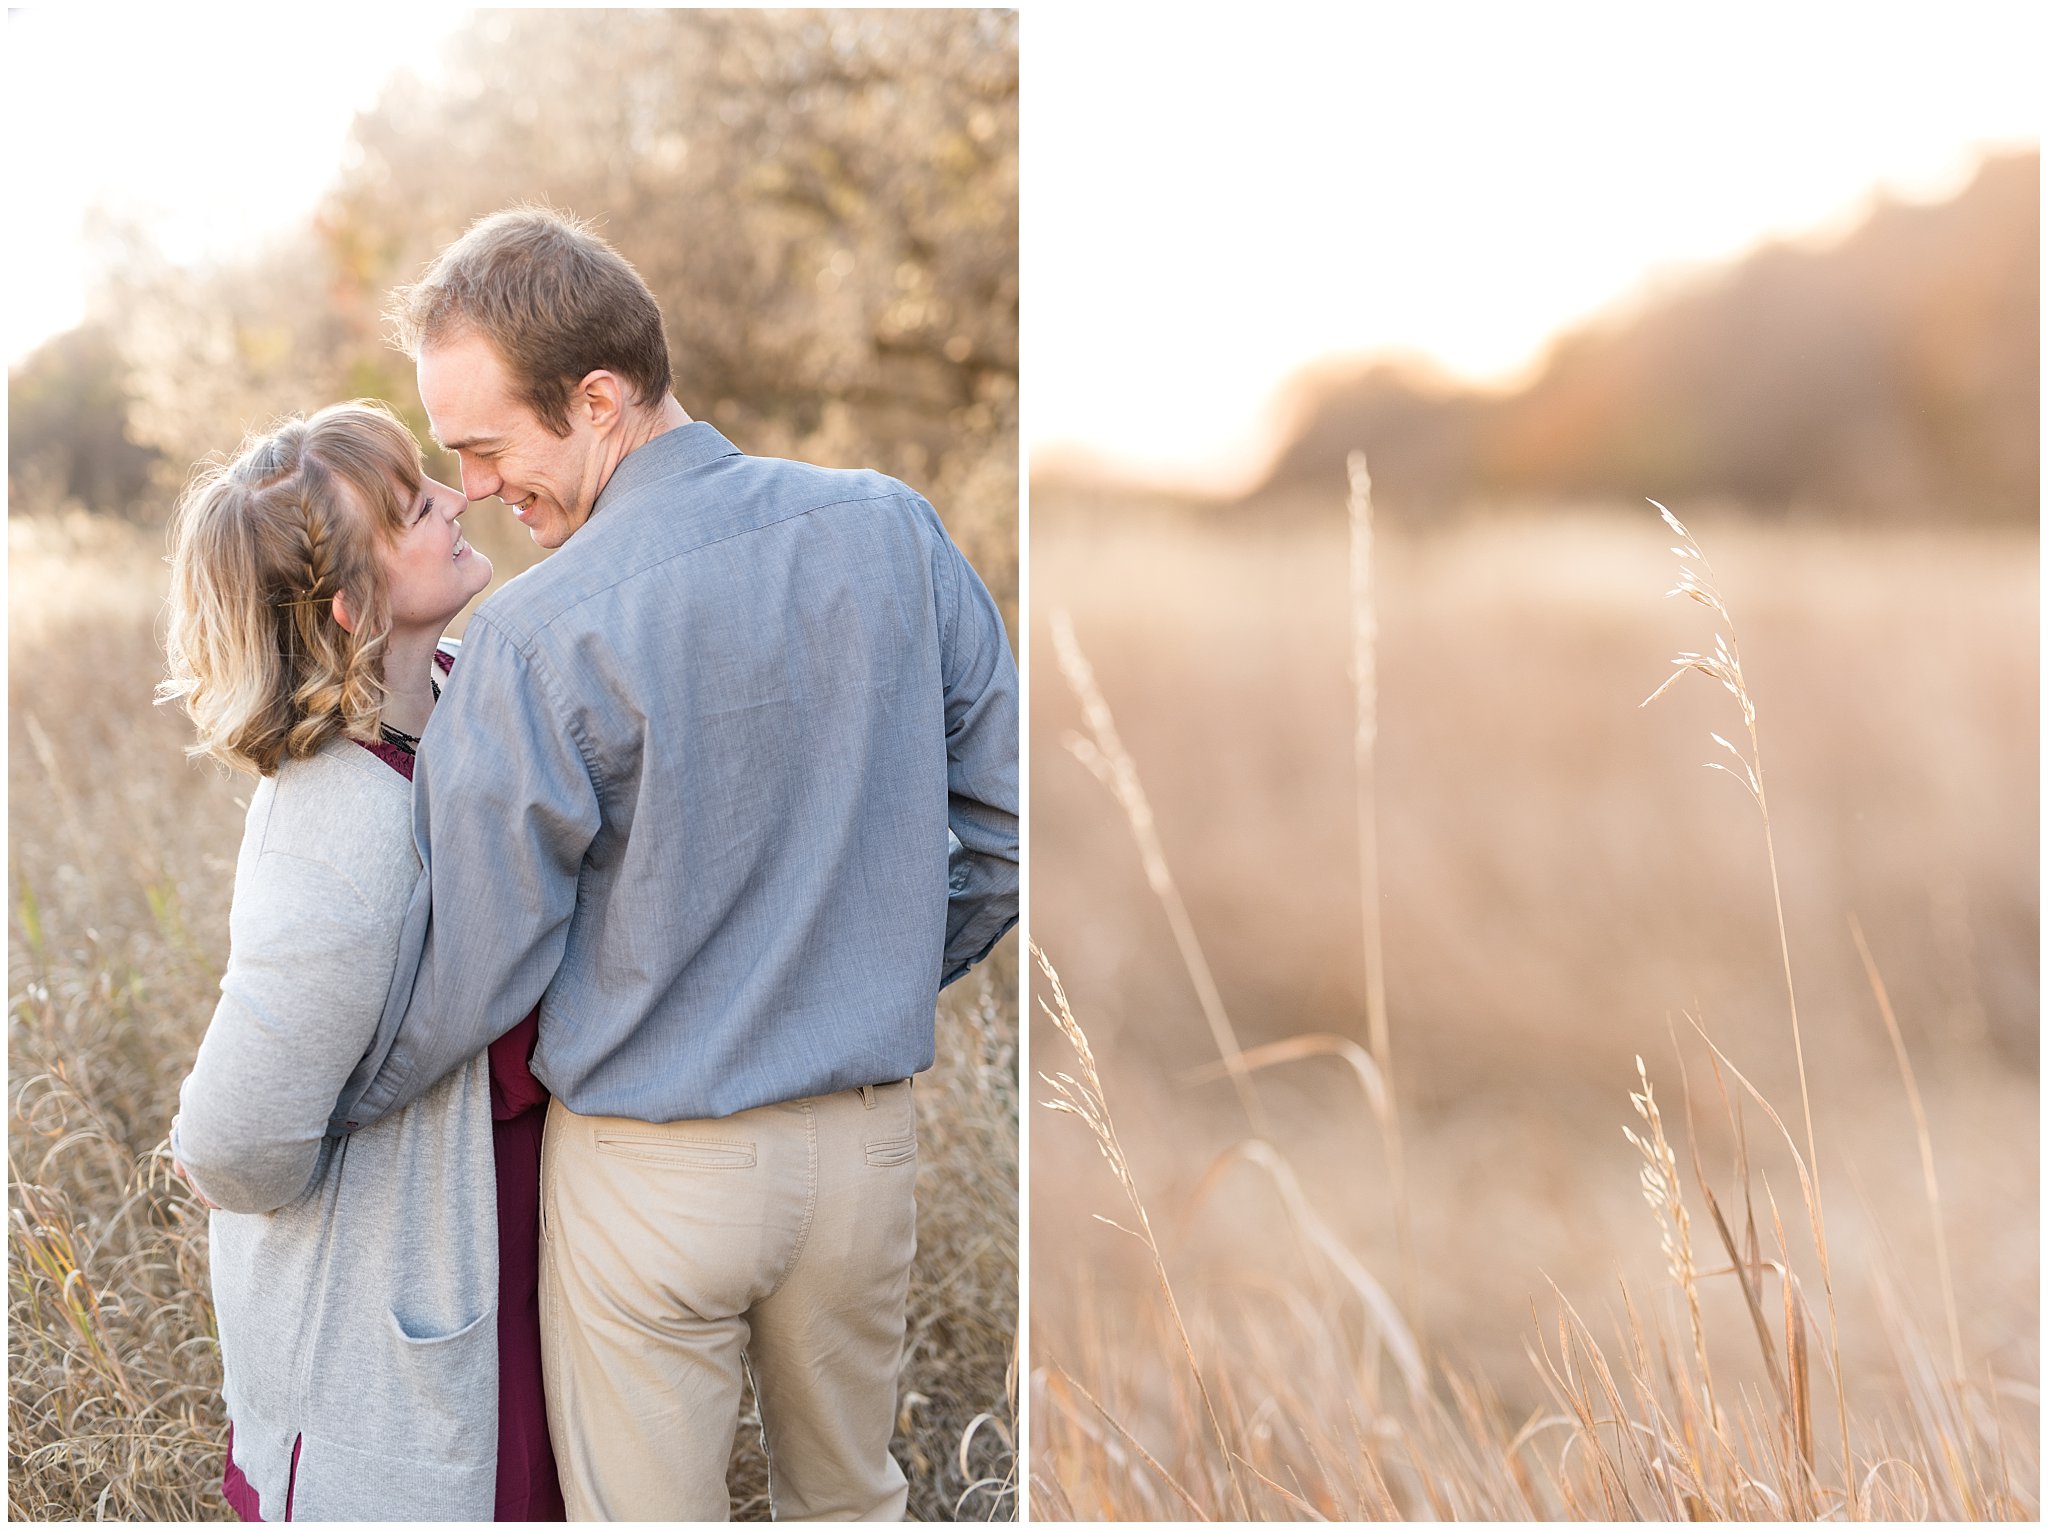 Utah Fall Engagement Photography | Couple in the fall grass | Jessie and Dallin Photography